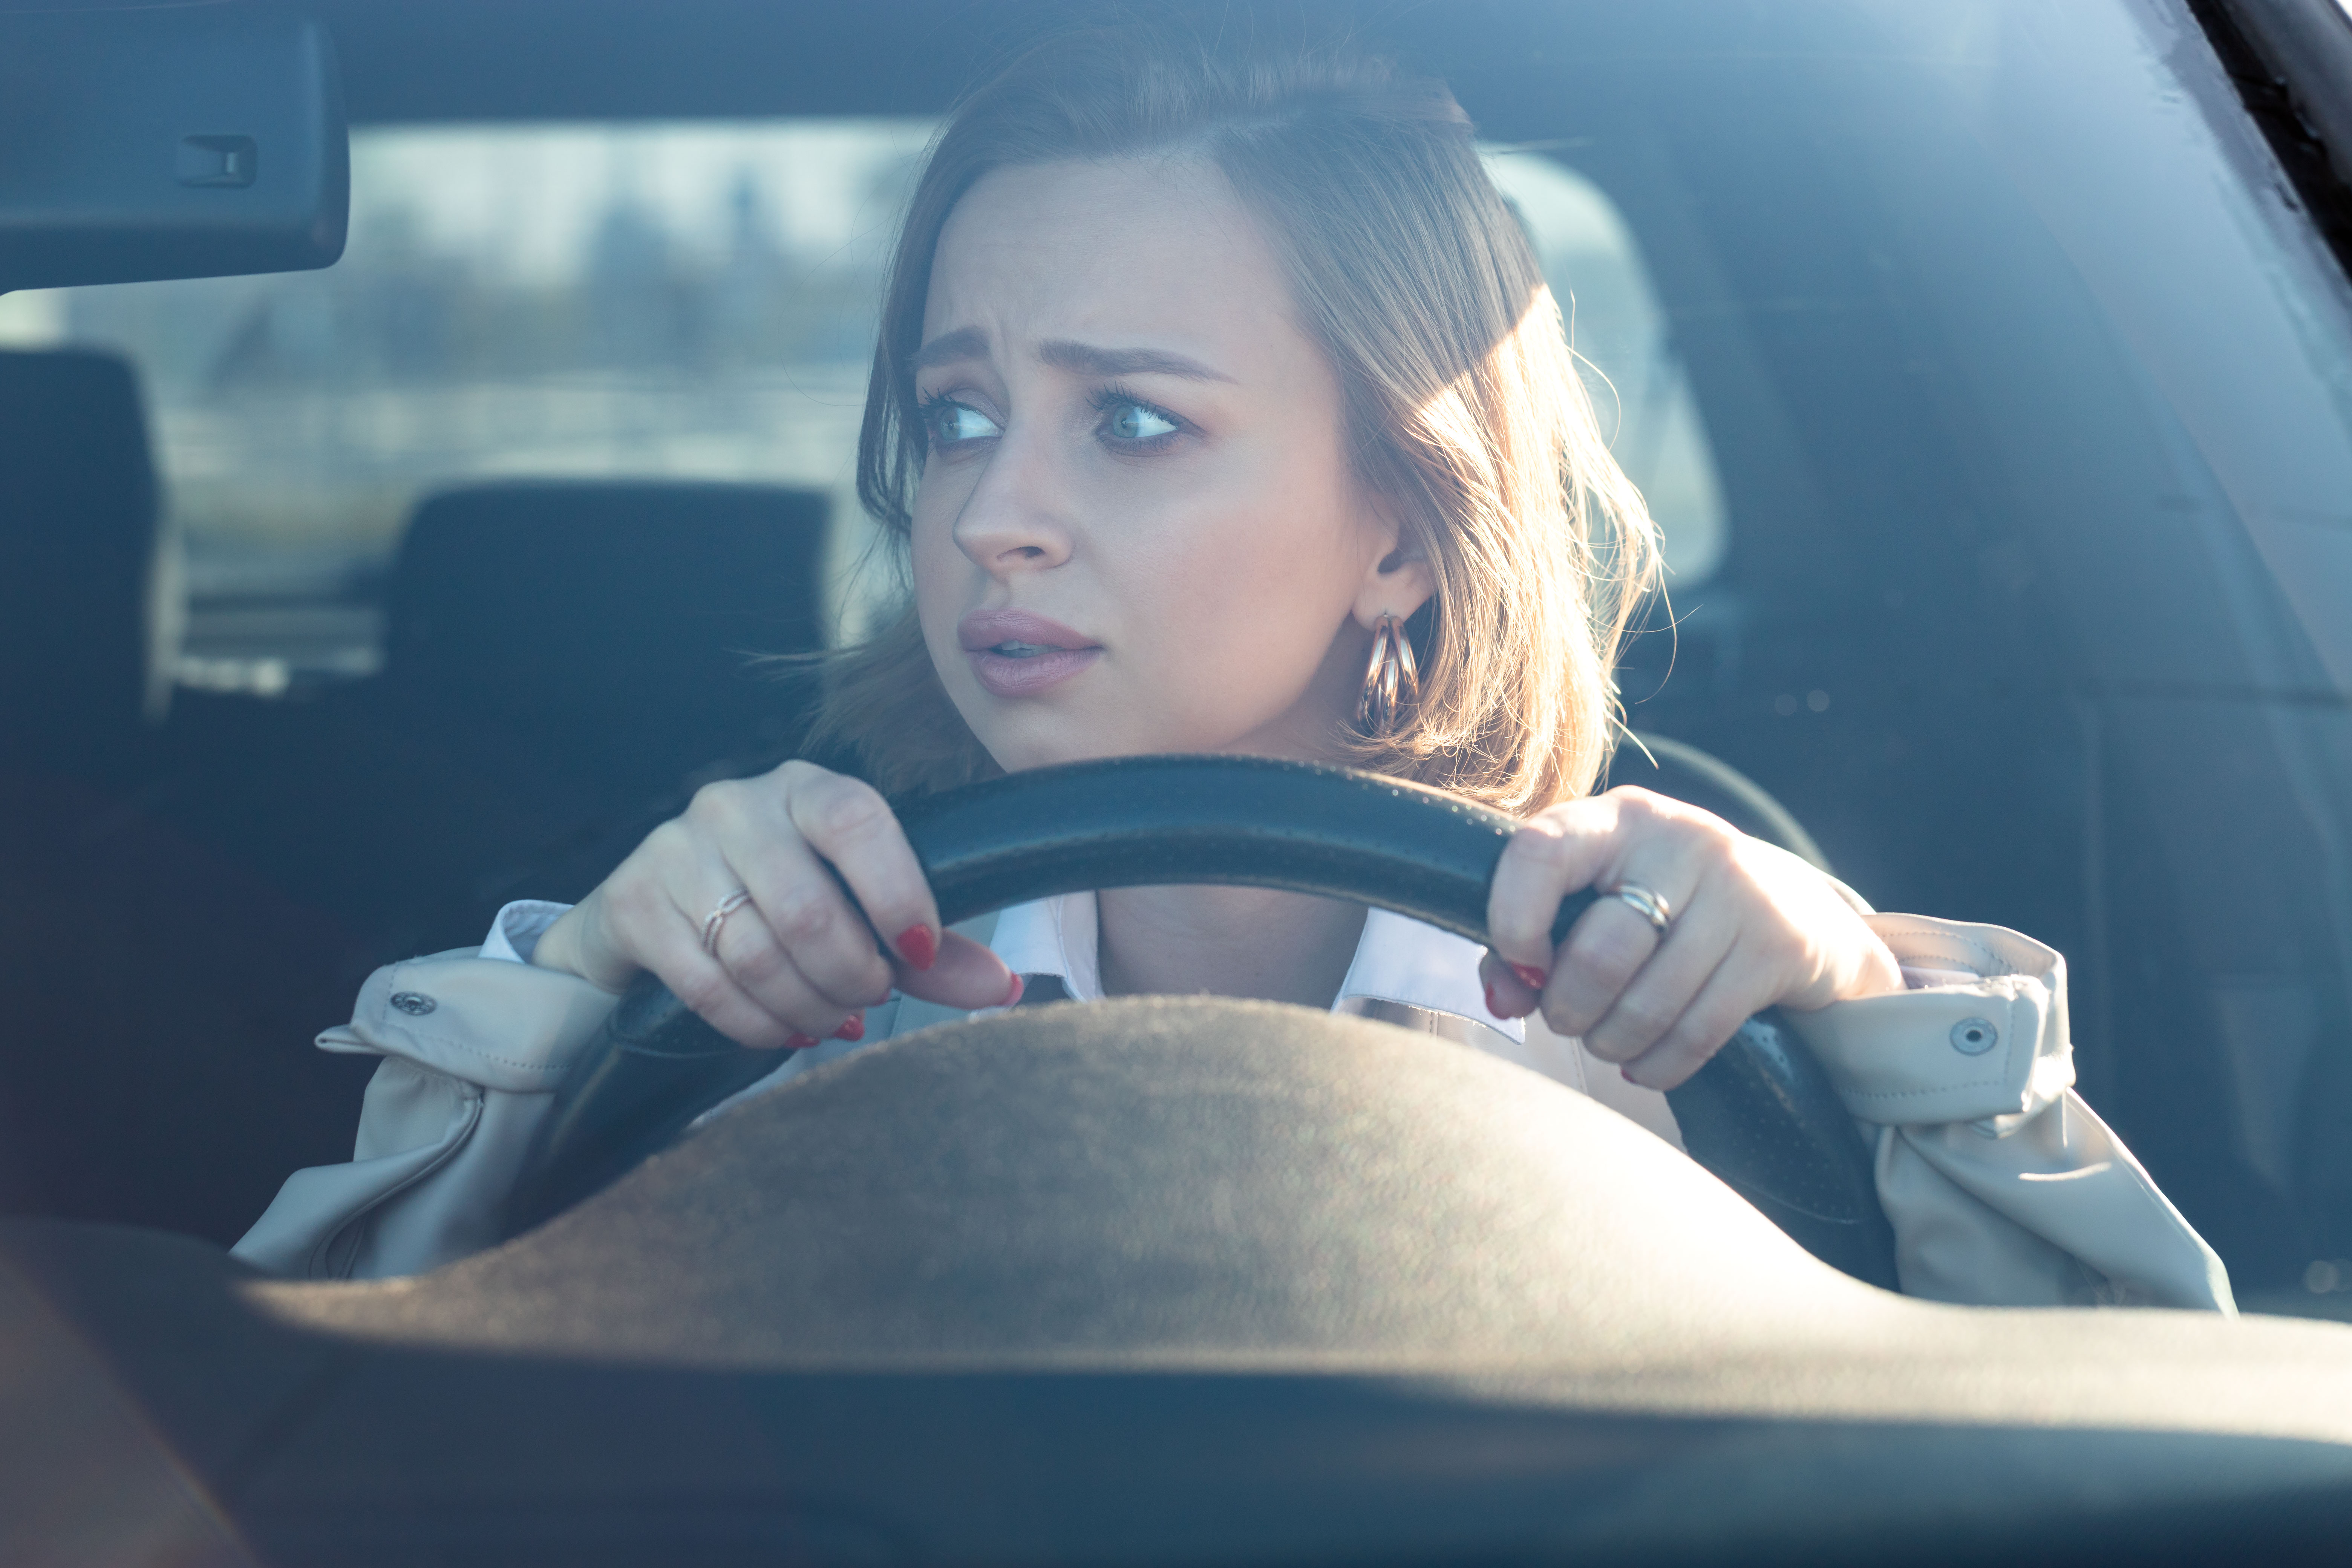 Woman drives her car for the first time, tries to avoid a car accident | Source: Shutterstock.com